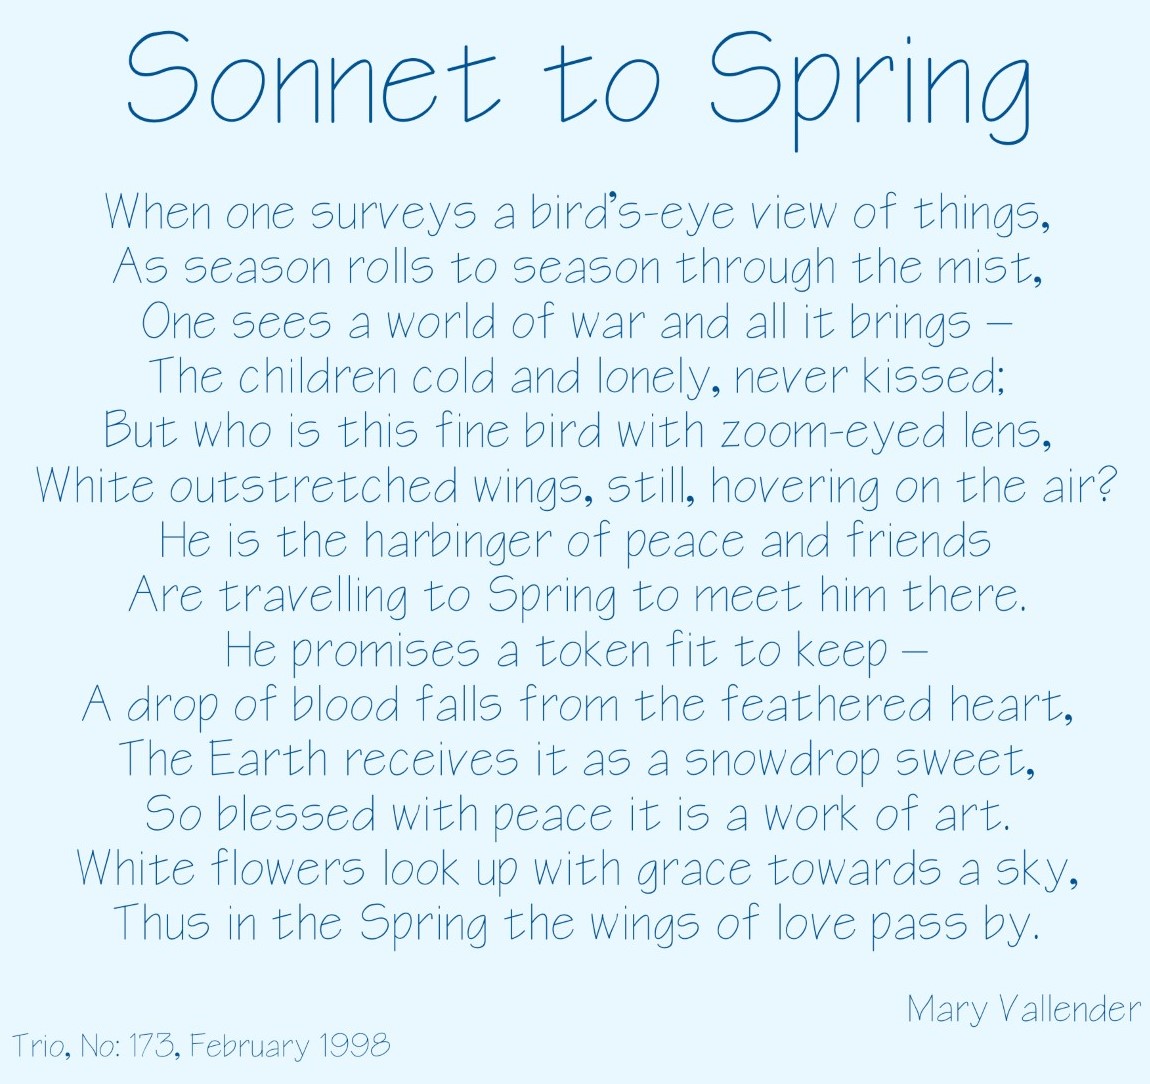 Sonnet to Spring